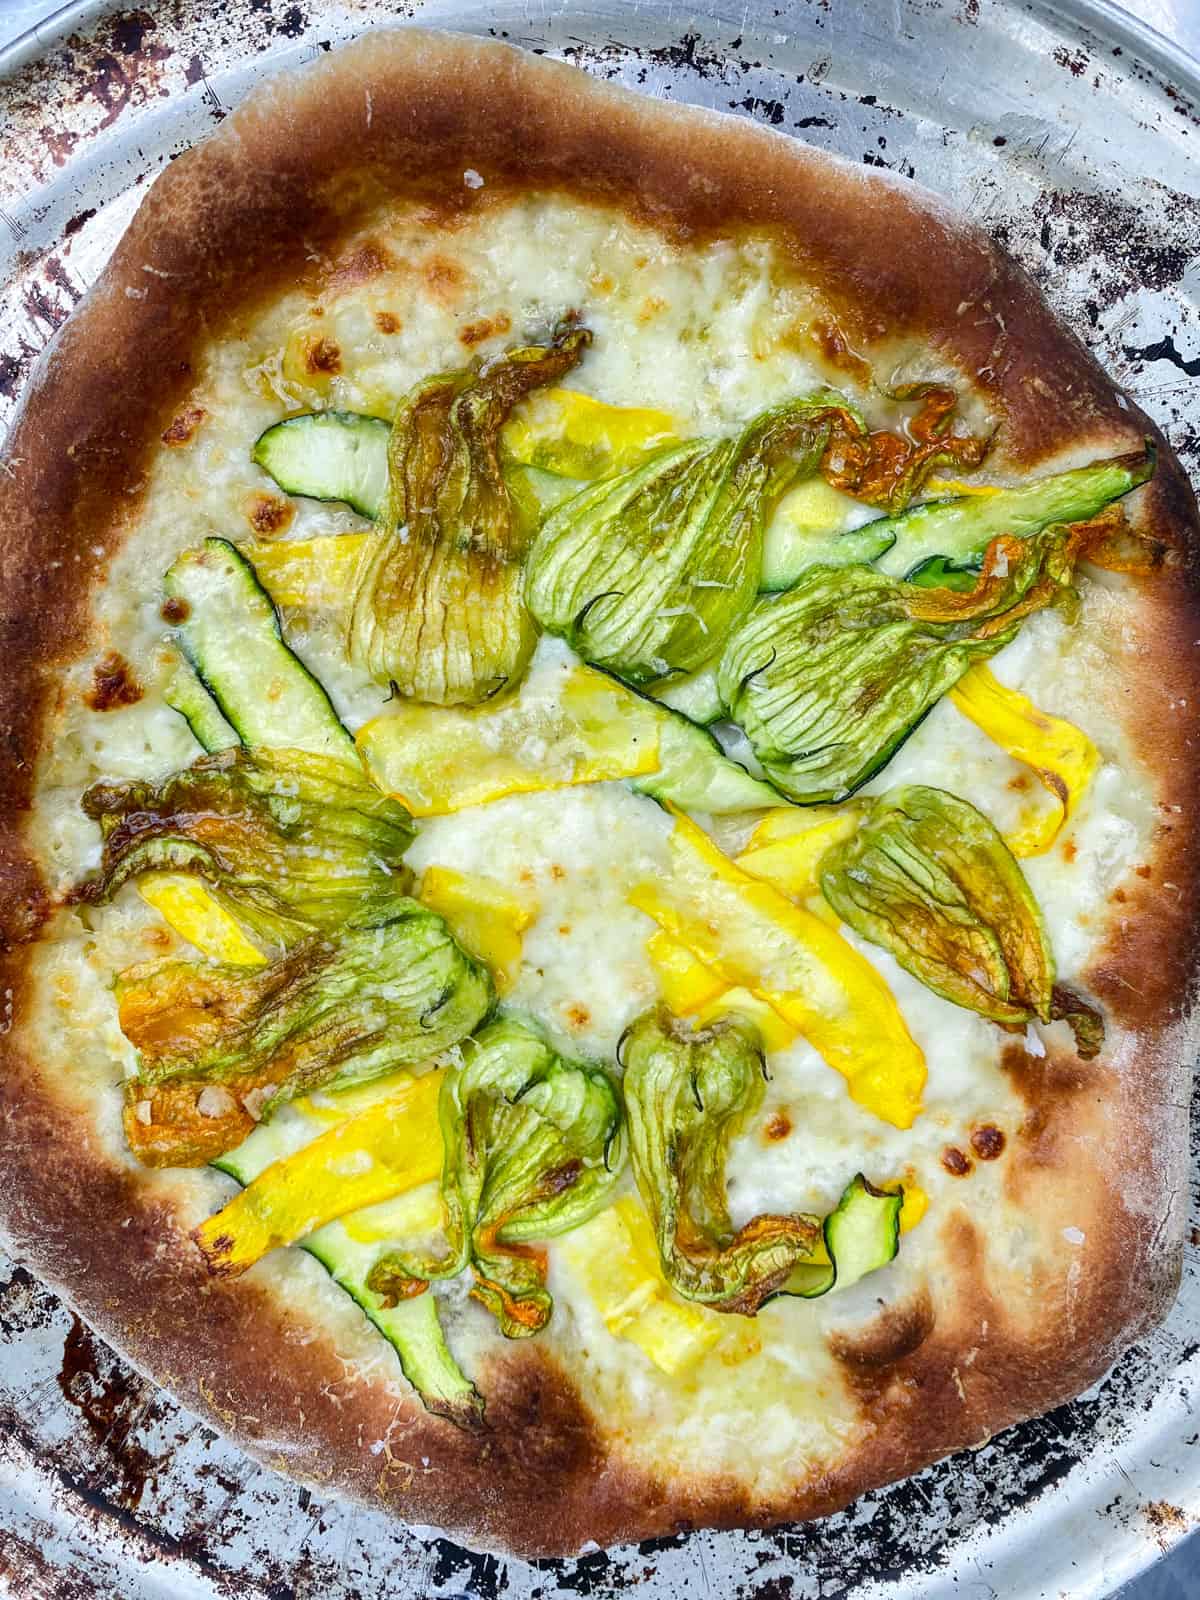 Cook the squash blossom pizza until cheese has melted and crust is golden brown.